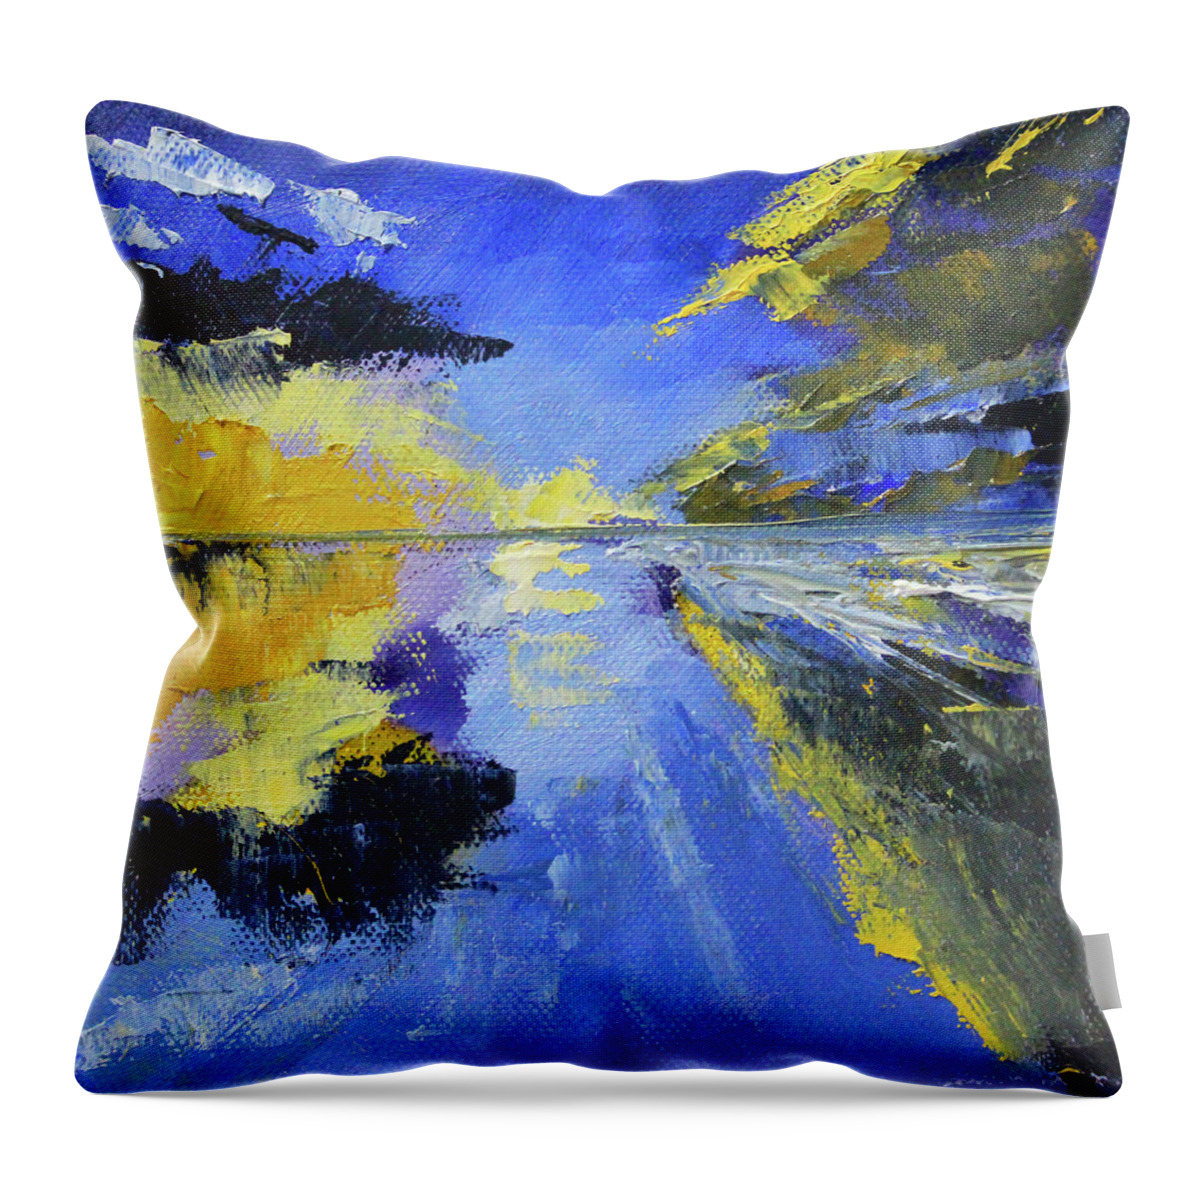 Beach Reflection Throw Pillow featuring the painting Beach Reflection by Nancy Merkle